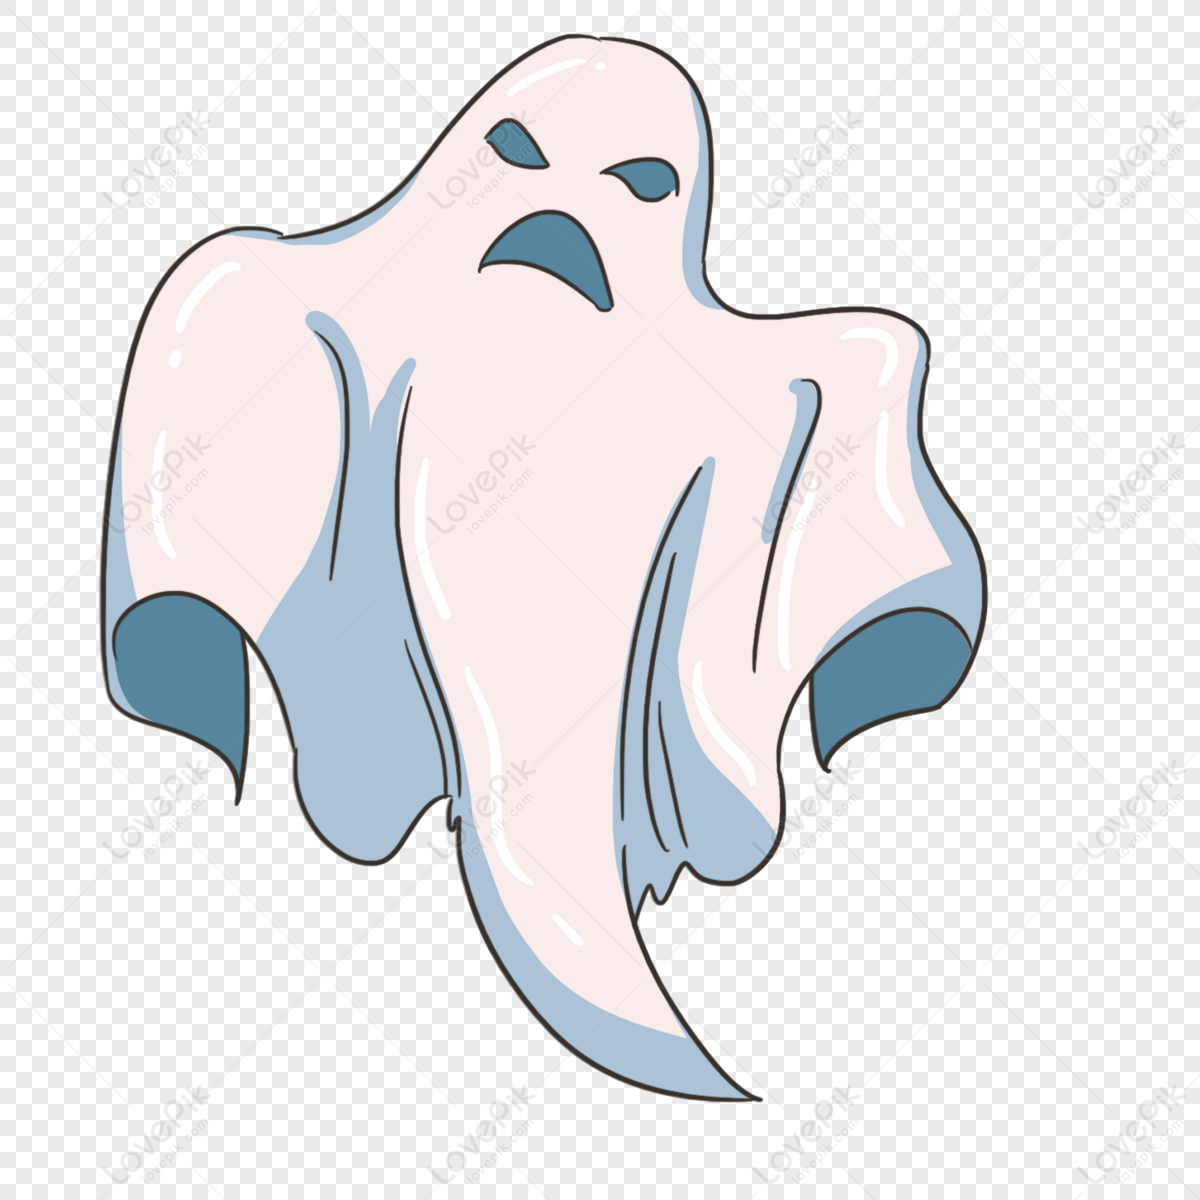 Halloween Ghost PNG Transparent Background And Clipart Image For Free  Download - Lovepik | 400708770